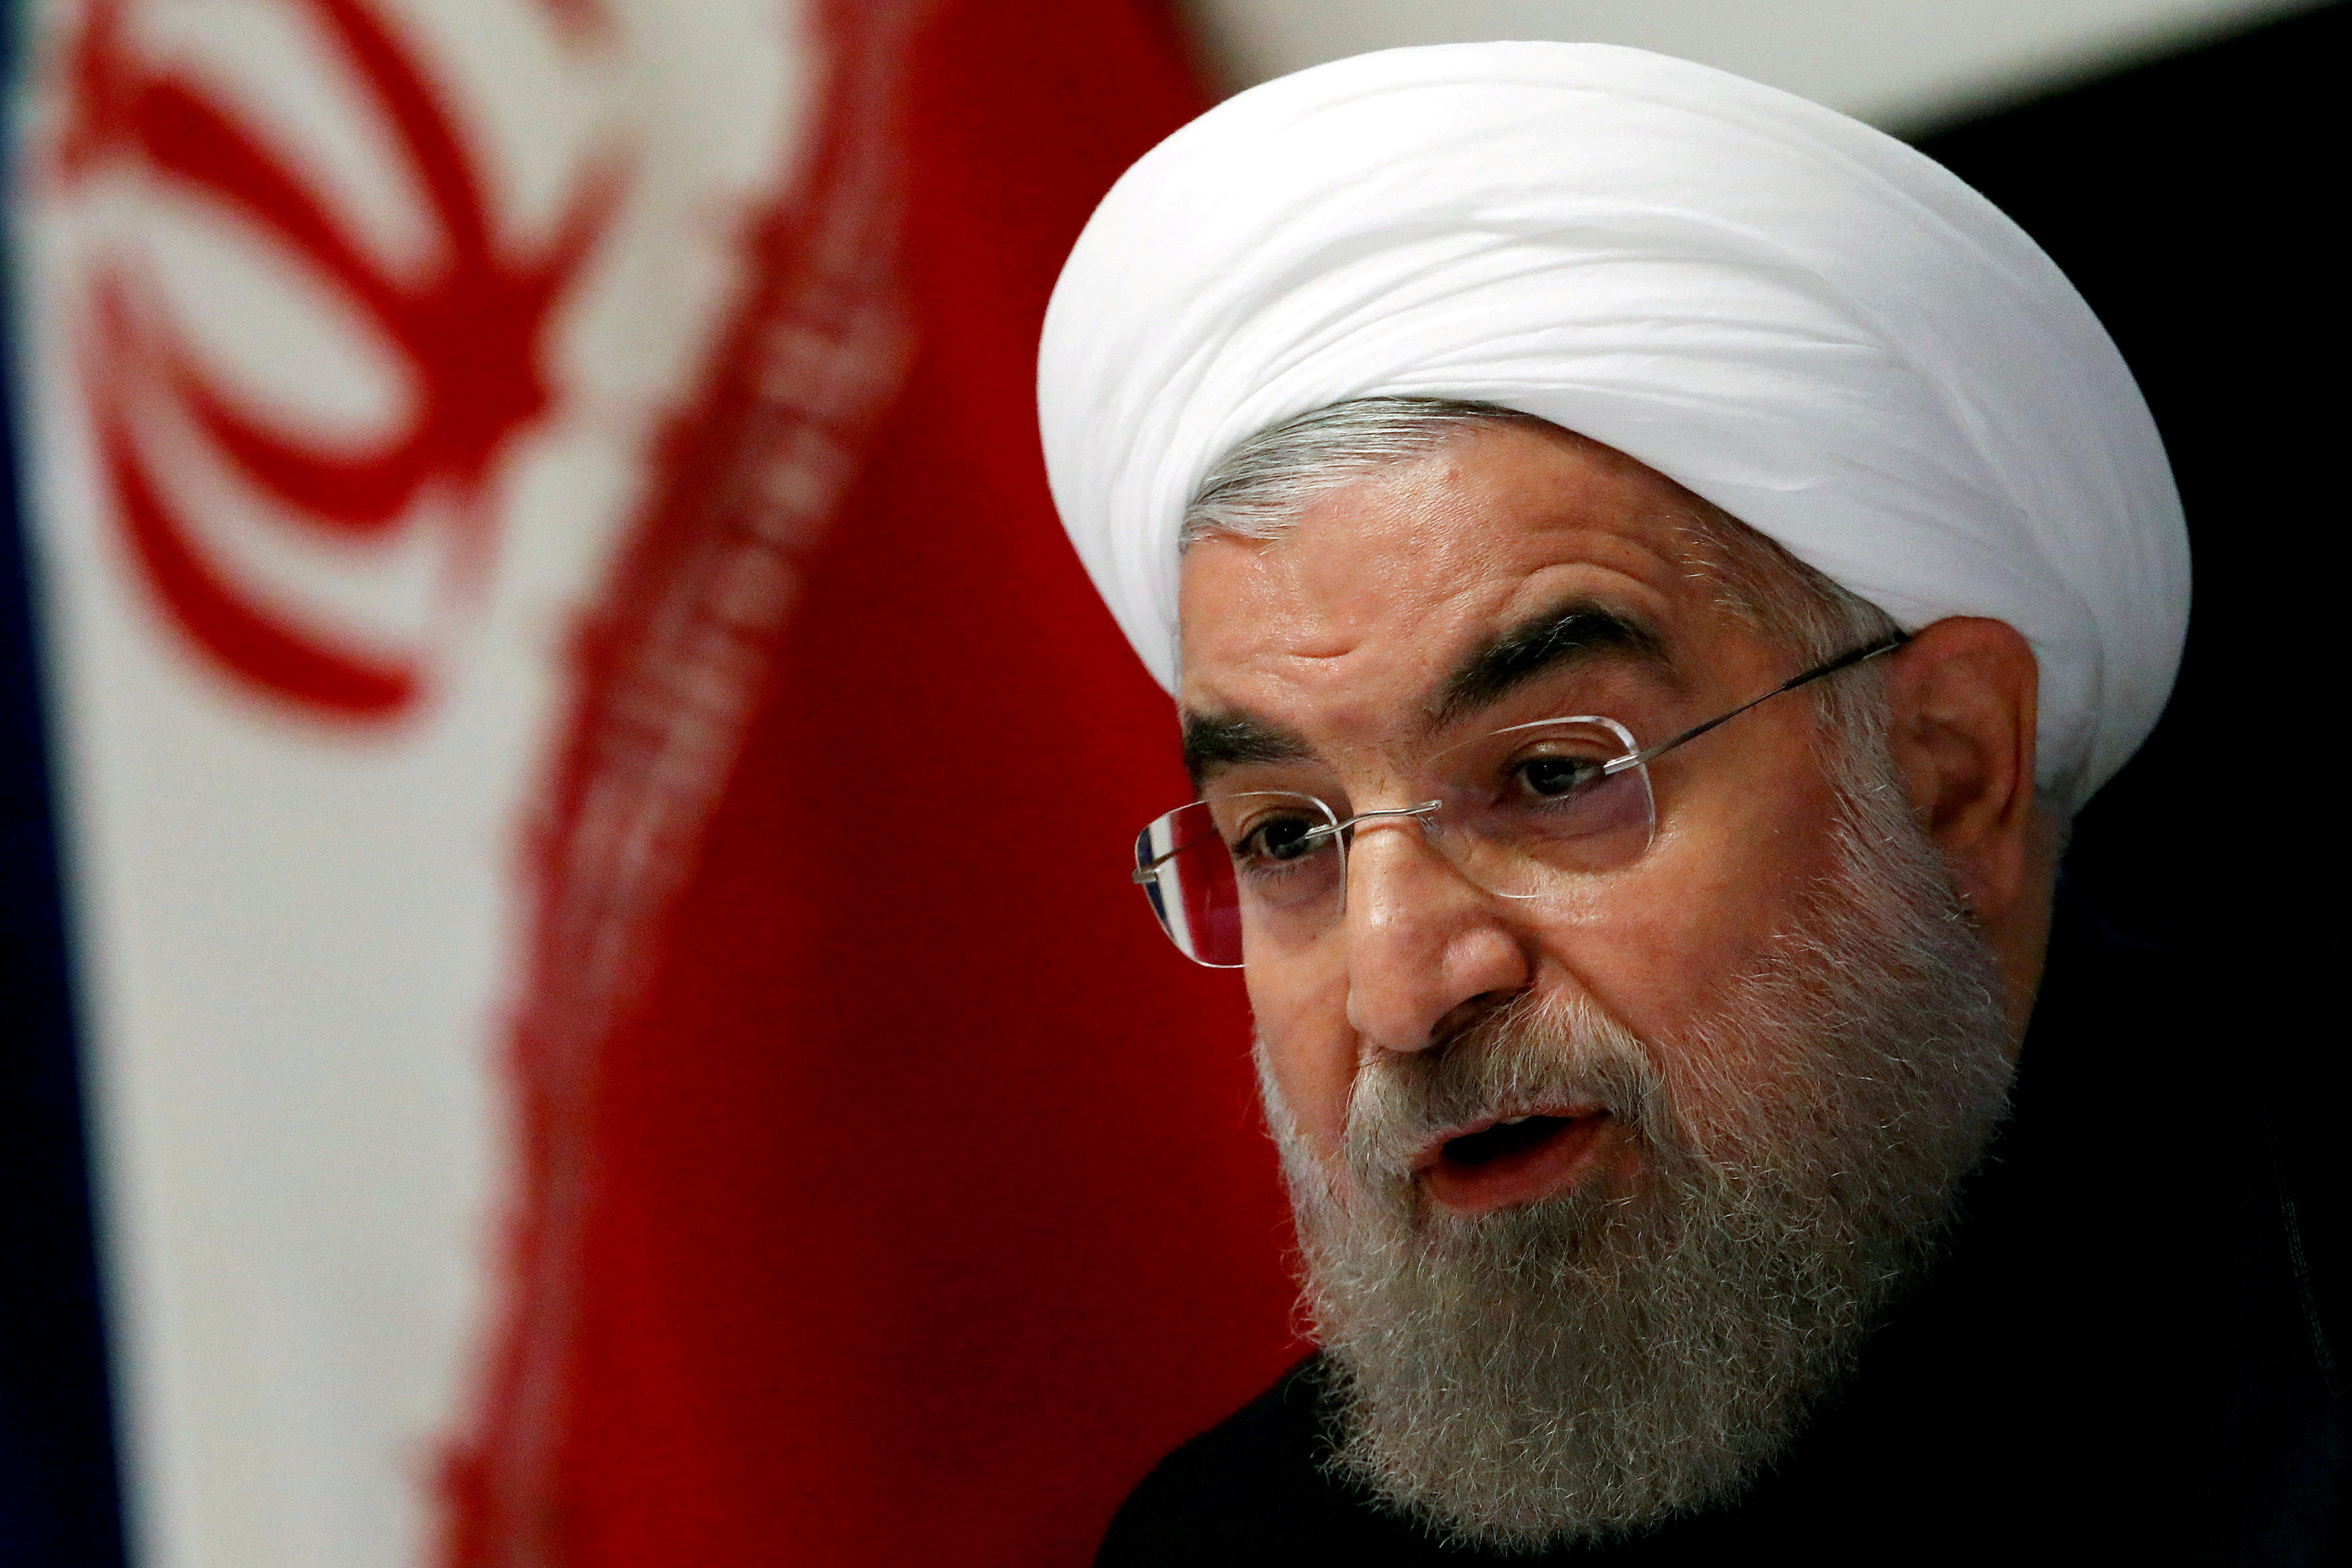 Iran president vows to "stand up to" U.S. over sanctions